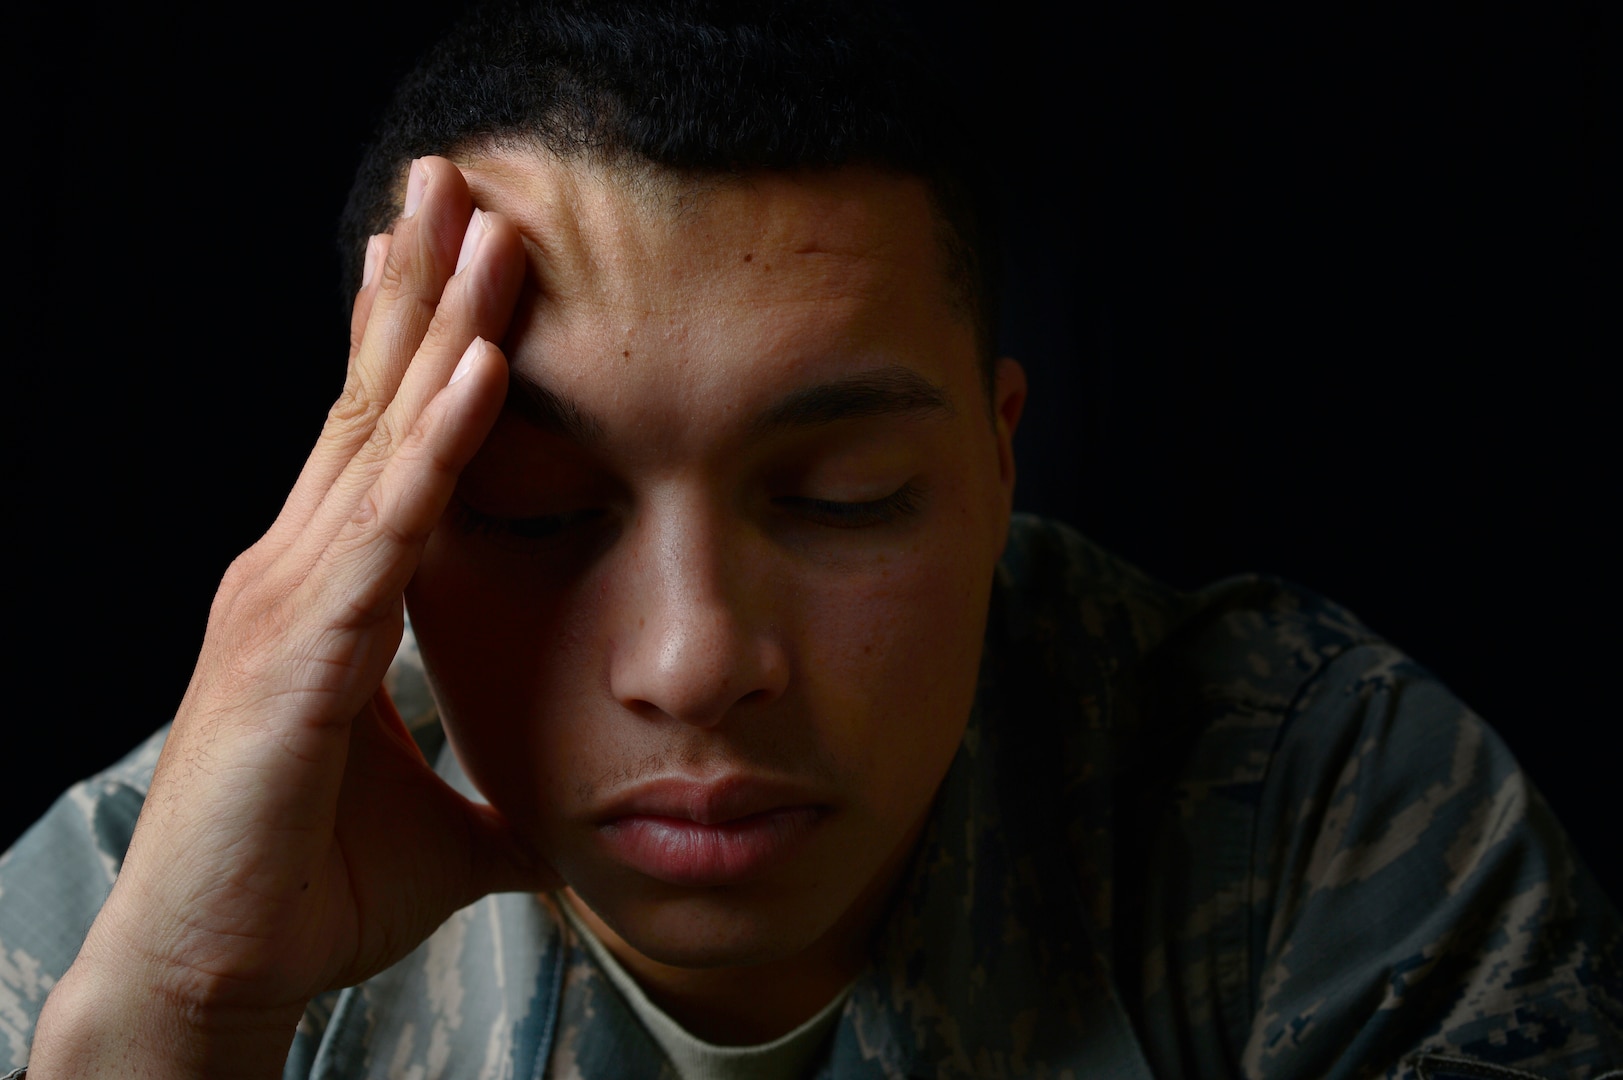 Post-Traumatic Stress Disorder is a significant or extreme emotional or psychological response to a shocking or dangerous or traumatic event. PTSD Awareness Month is observed during June to help spread the word that currently in the United States, approximately 12 million people (about six of every 100) live with PTSD, according to the U.S. Department of Veterans Affairs (VA).